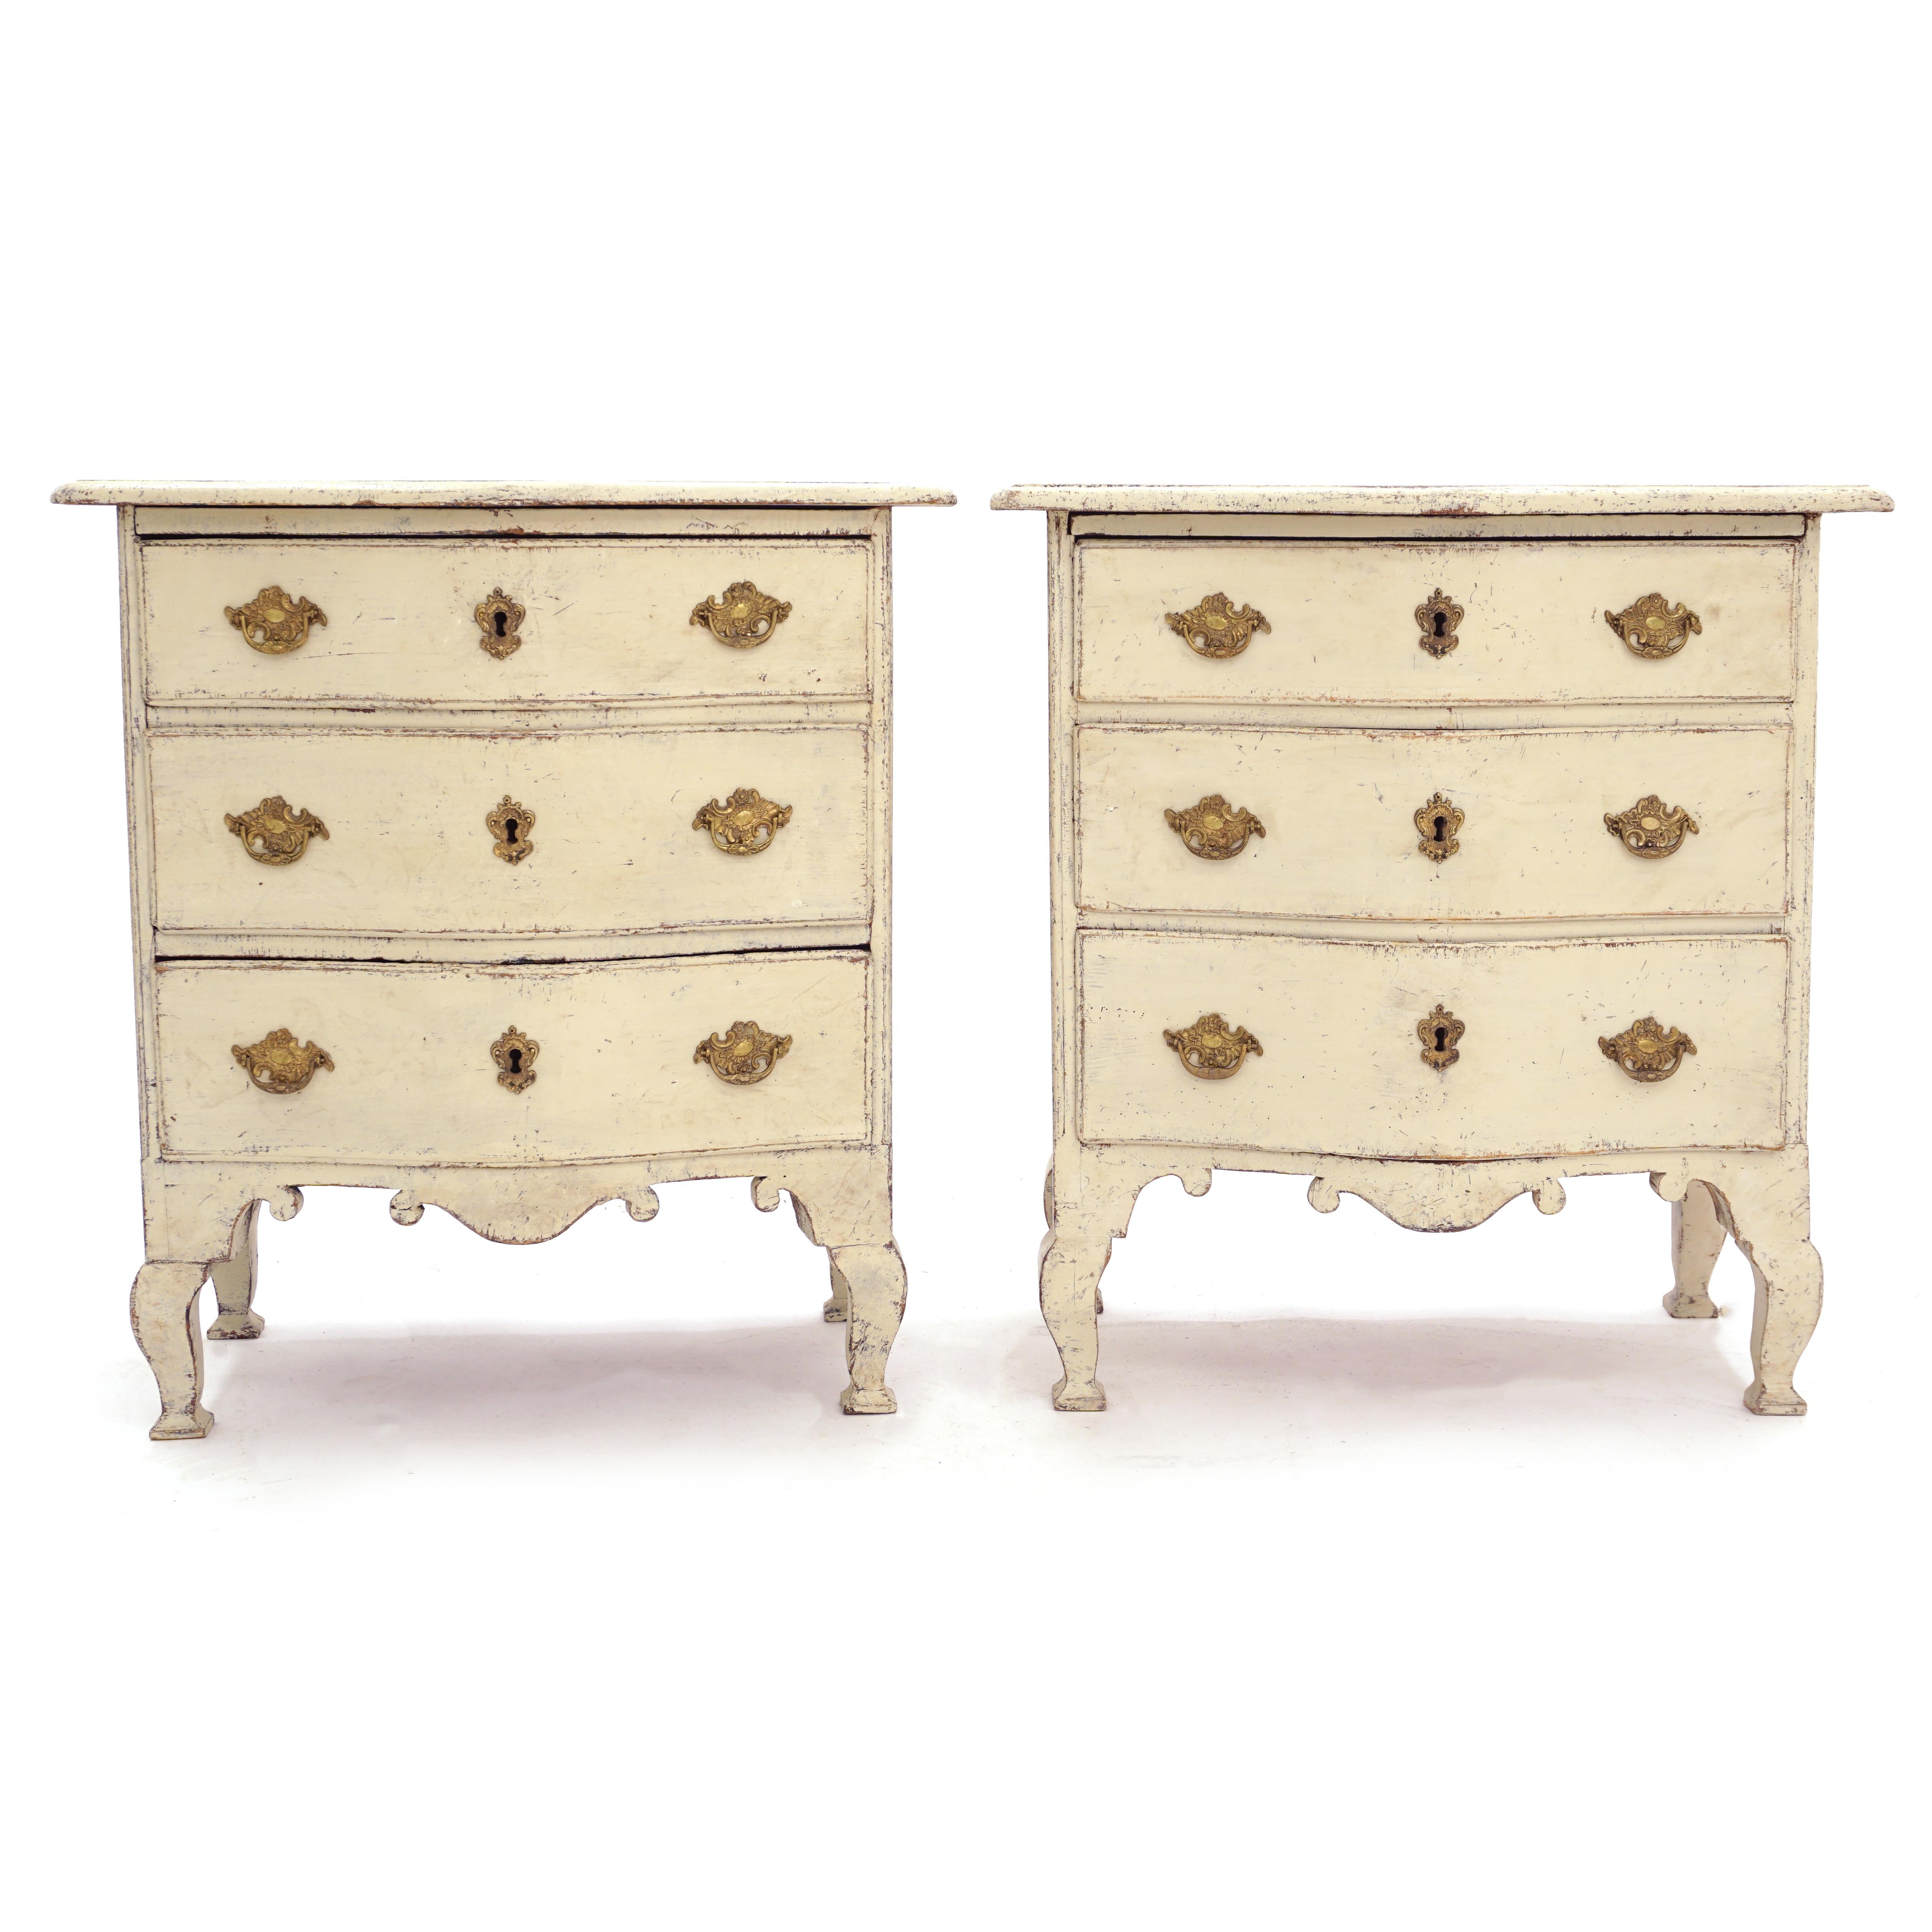 A pair of mid-18th century Swedish Baroque commodes
Later professional beautiful painted and patinated.
      